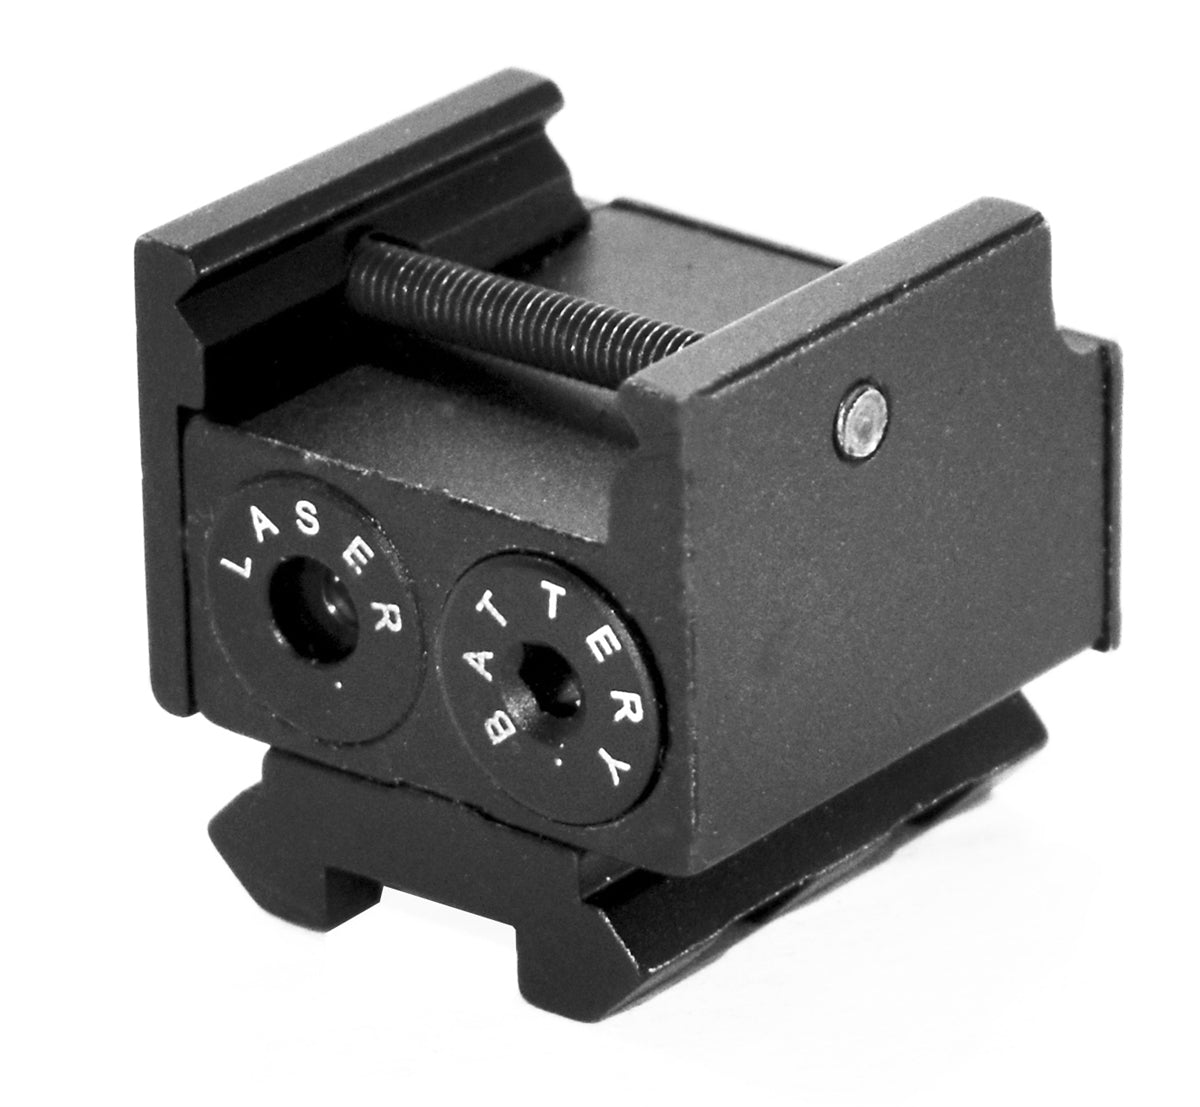 Trinity Compact red dot Sight for cz p10 Tactical Optics Home Defense Accessory Picatinny Weaver Mount Adapter Aluminum Black. - TRINITY SUPPLY INC